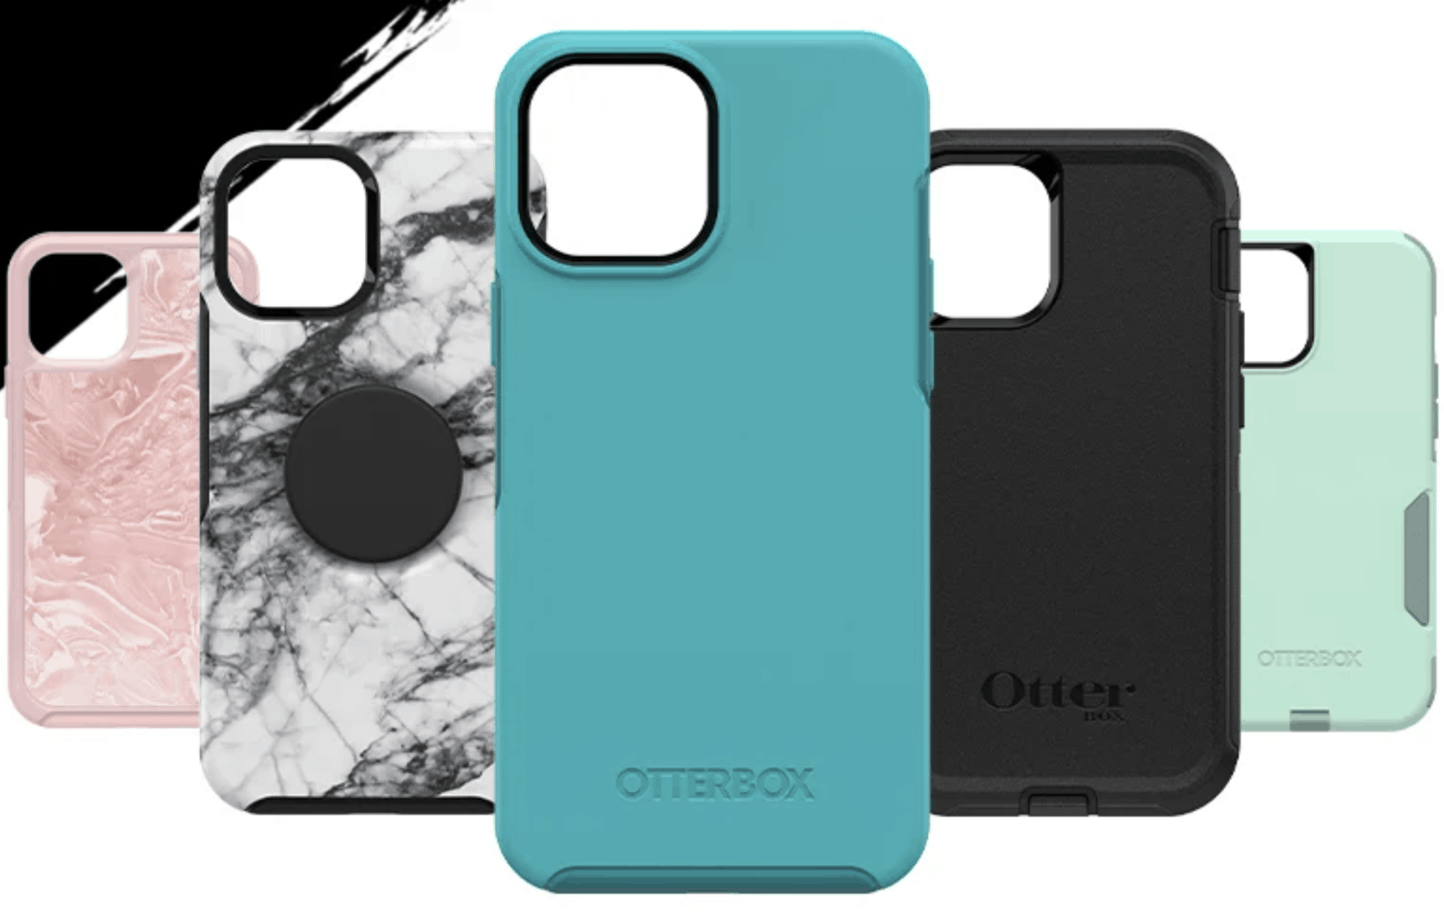 OtterBox iPhone 12 cases